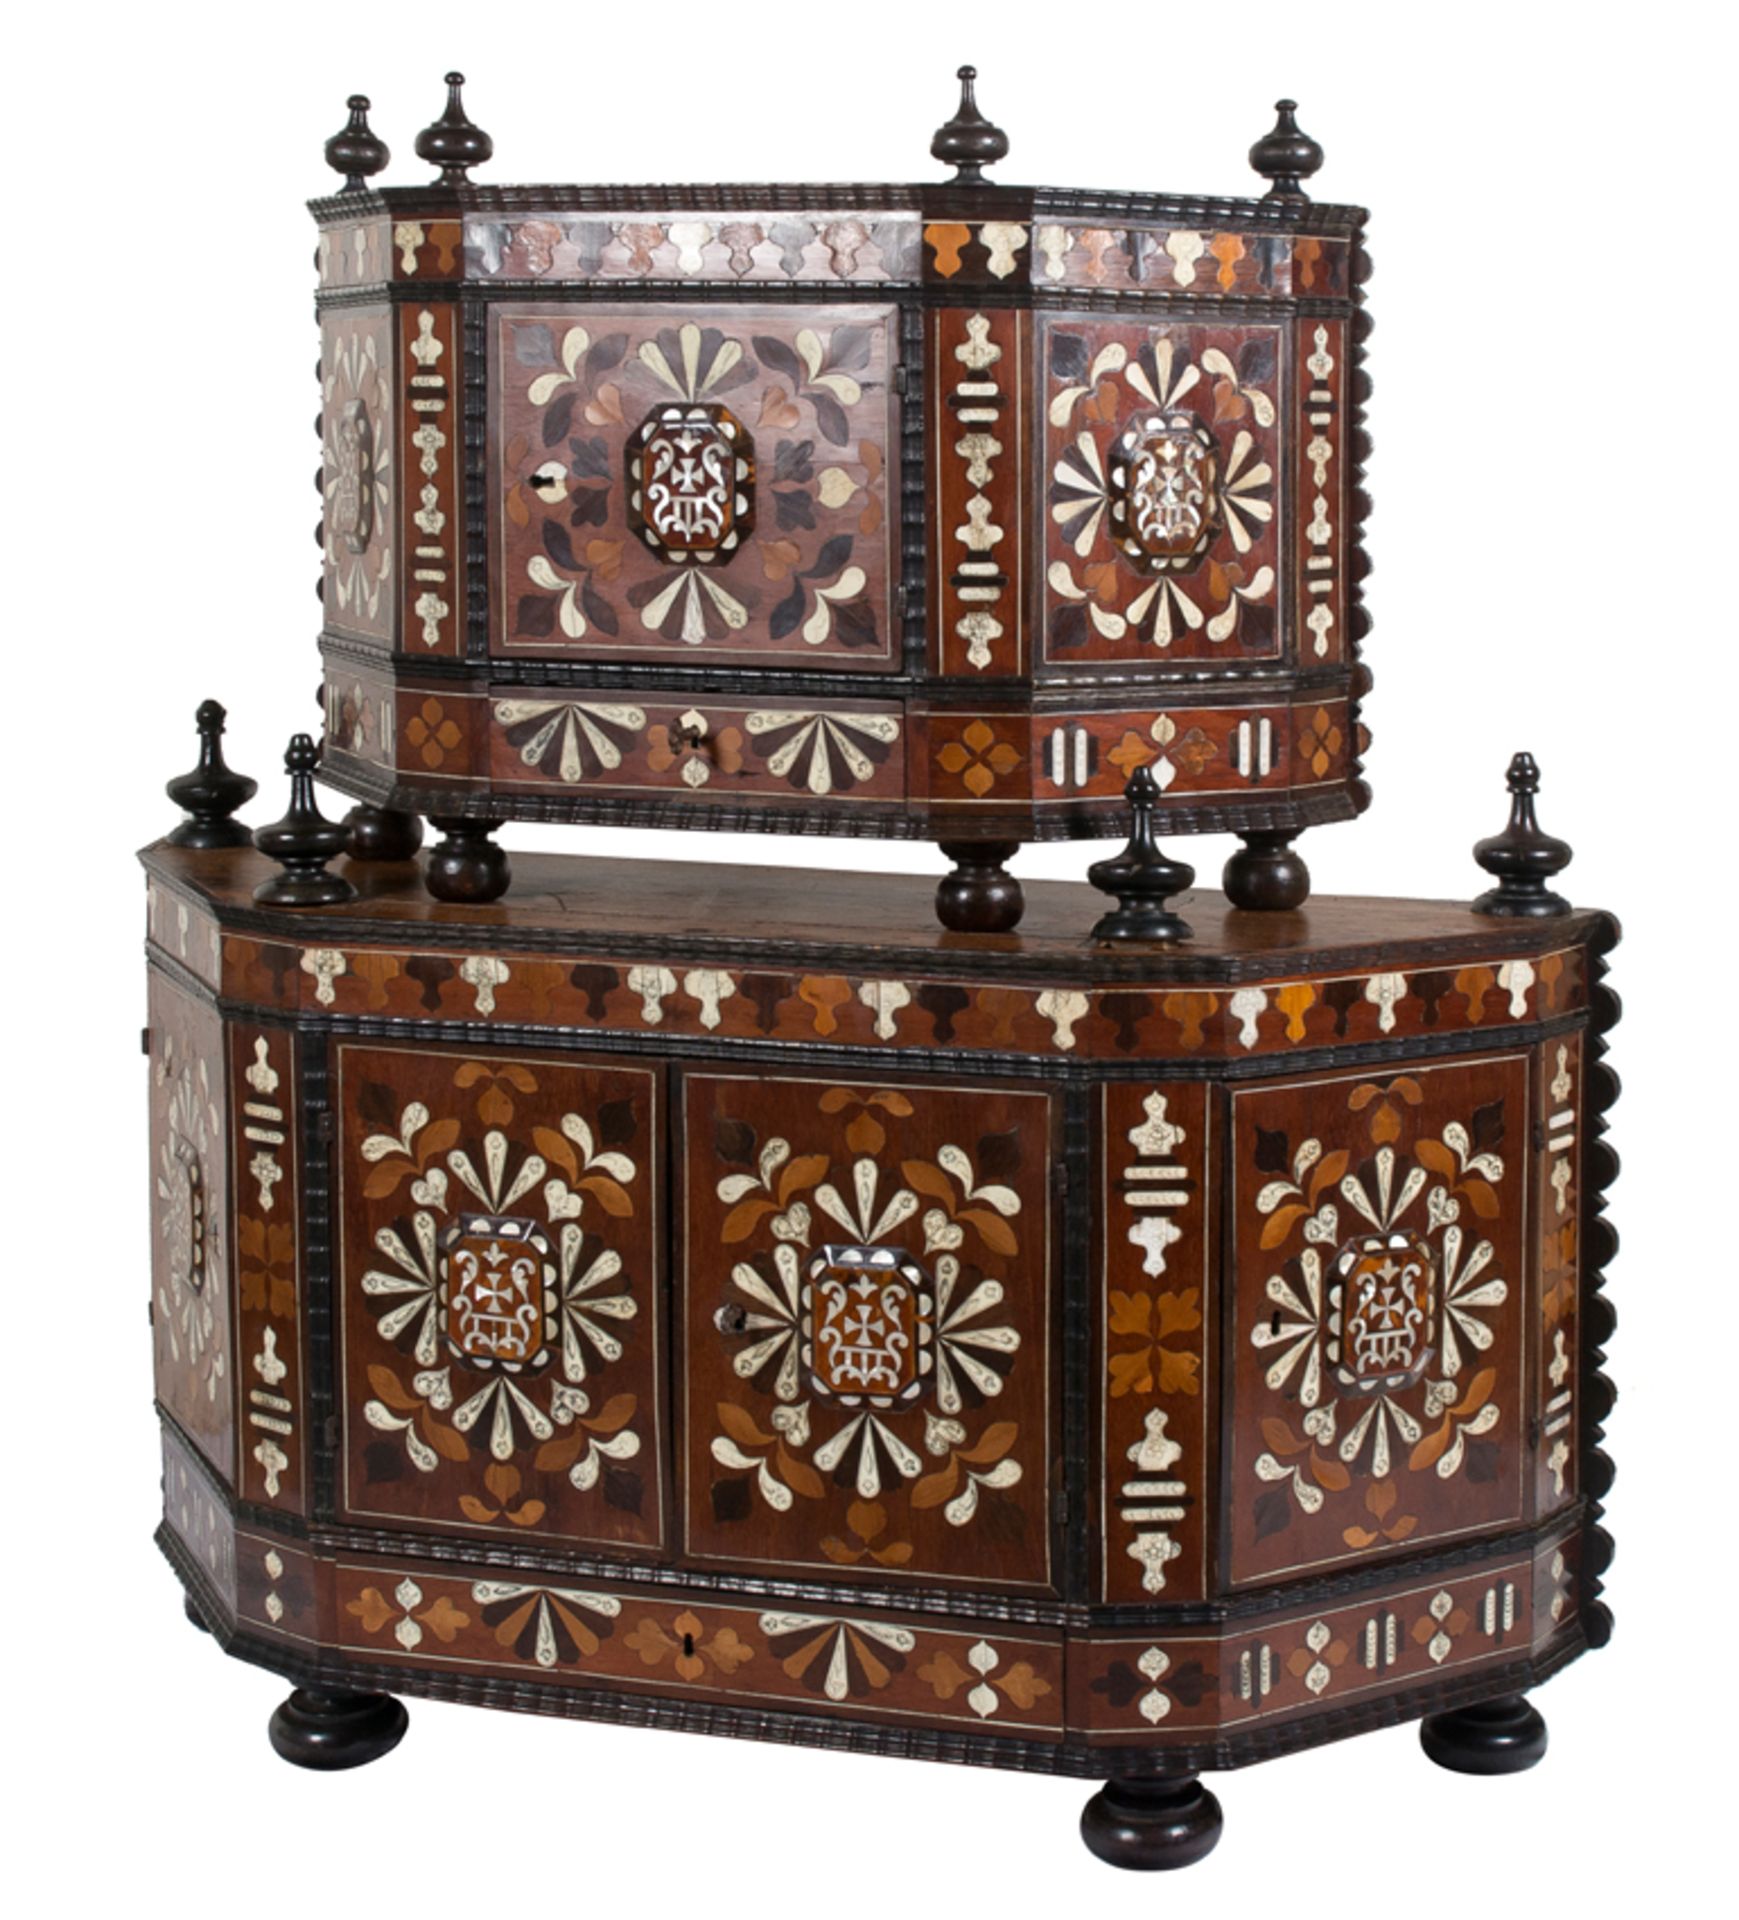 Imposing writing cabinet set with its "contador". Lima. Viceroyalty of Peru. 18th century. - Bild 2 aus 9